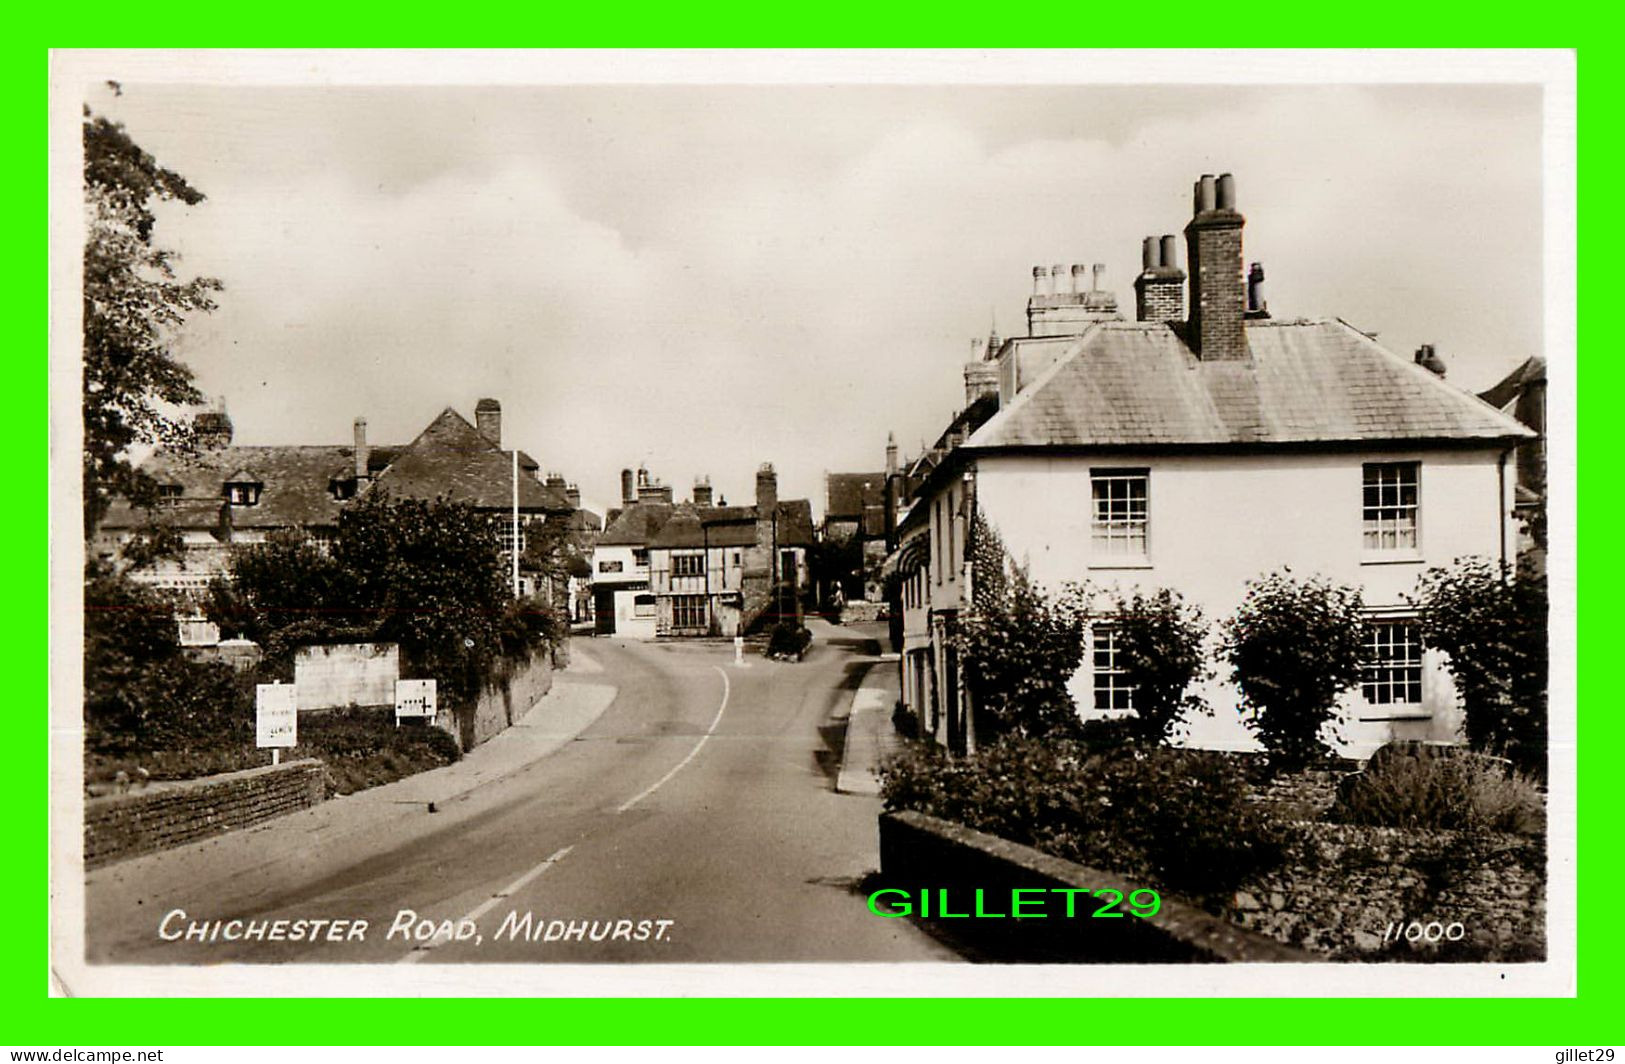 MIDHURST, SUSSEX, UK - VIEW OF CHICHESTER ROAD - TRAVEL IN 1953 -  REAL PHOTOGRAPH - - Chichester